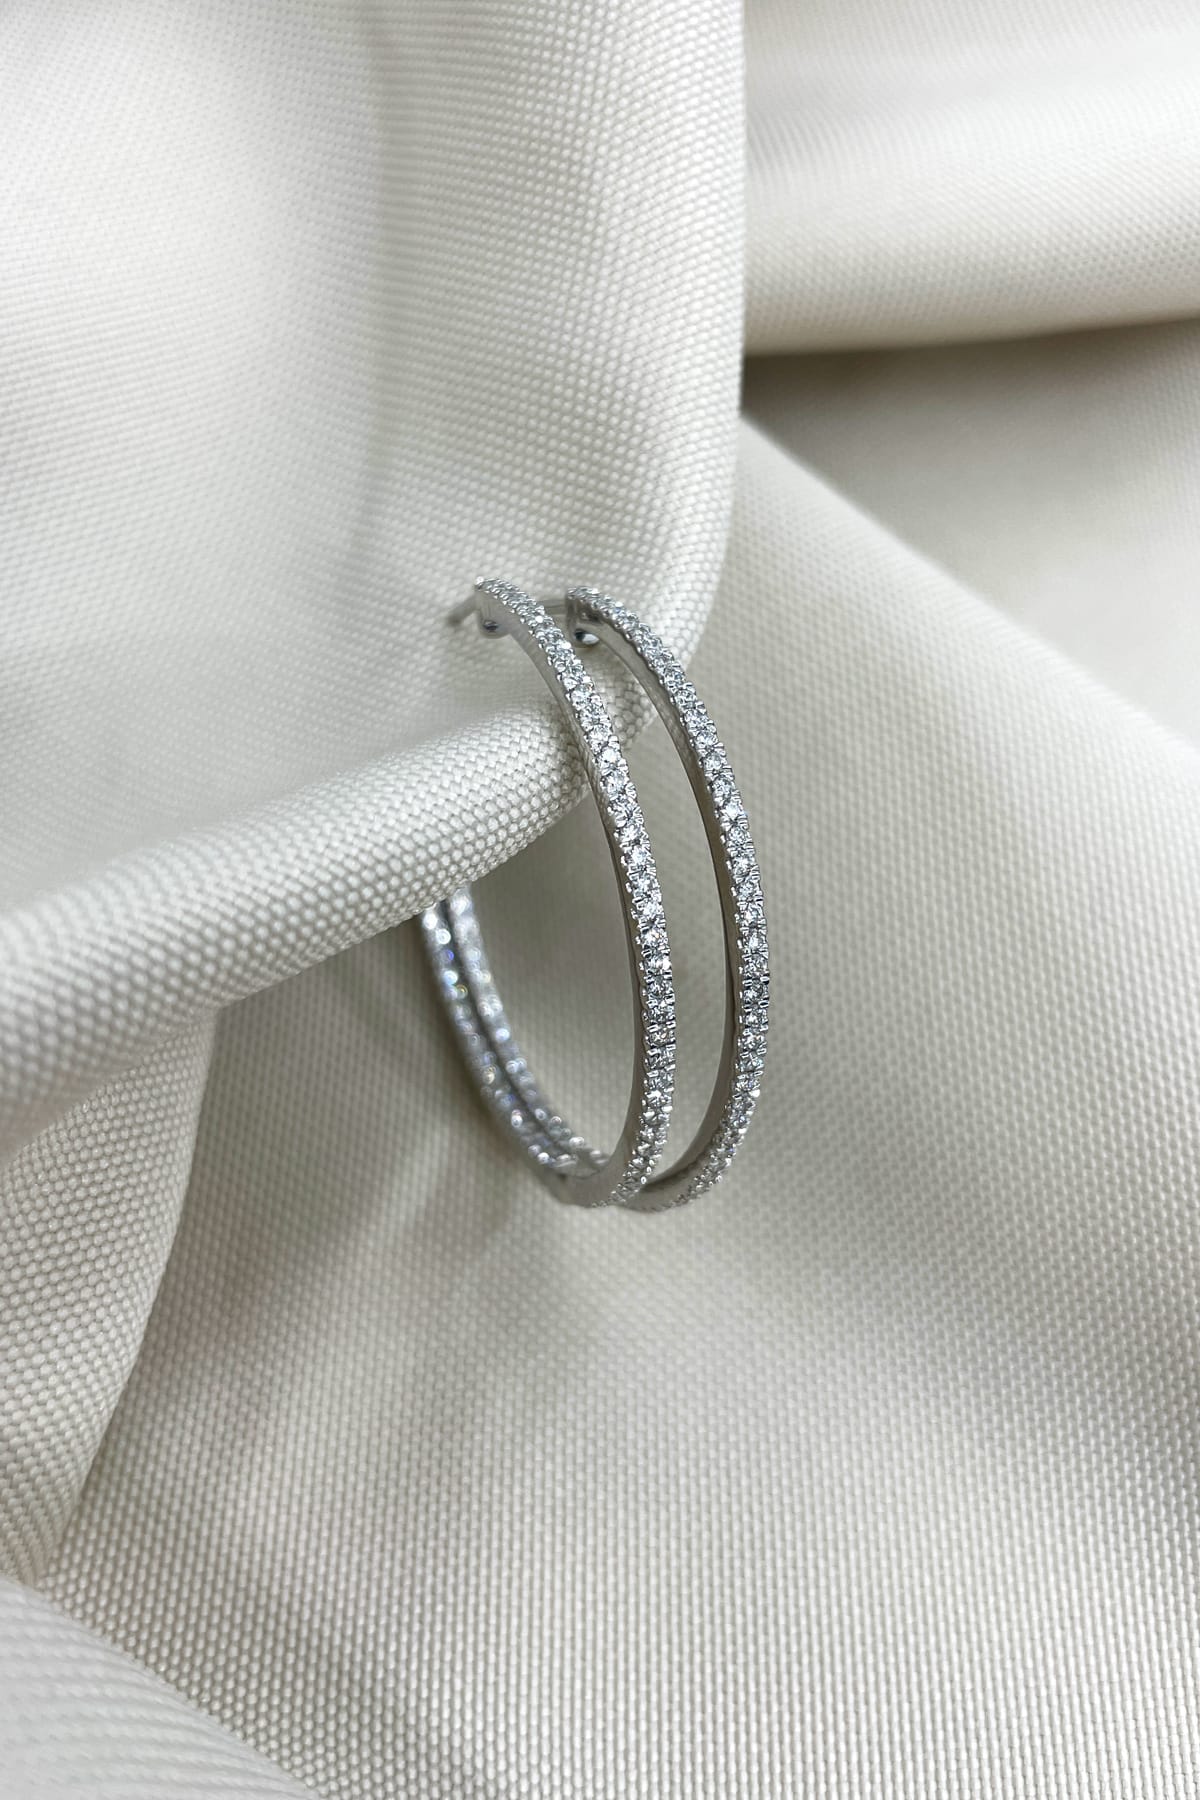 1.30ct Diamond Set Hoop Earrings set in 9ct White Gold available at LeGassick Diamonds and Jewellery Gold Coast, Australia.